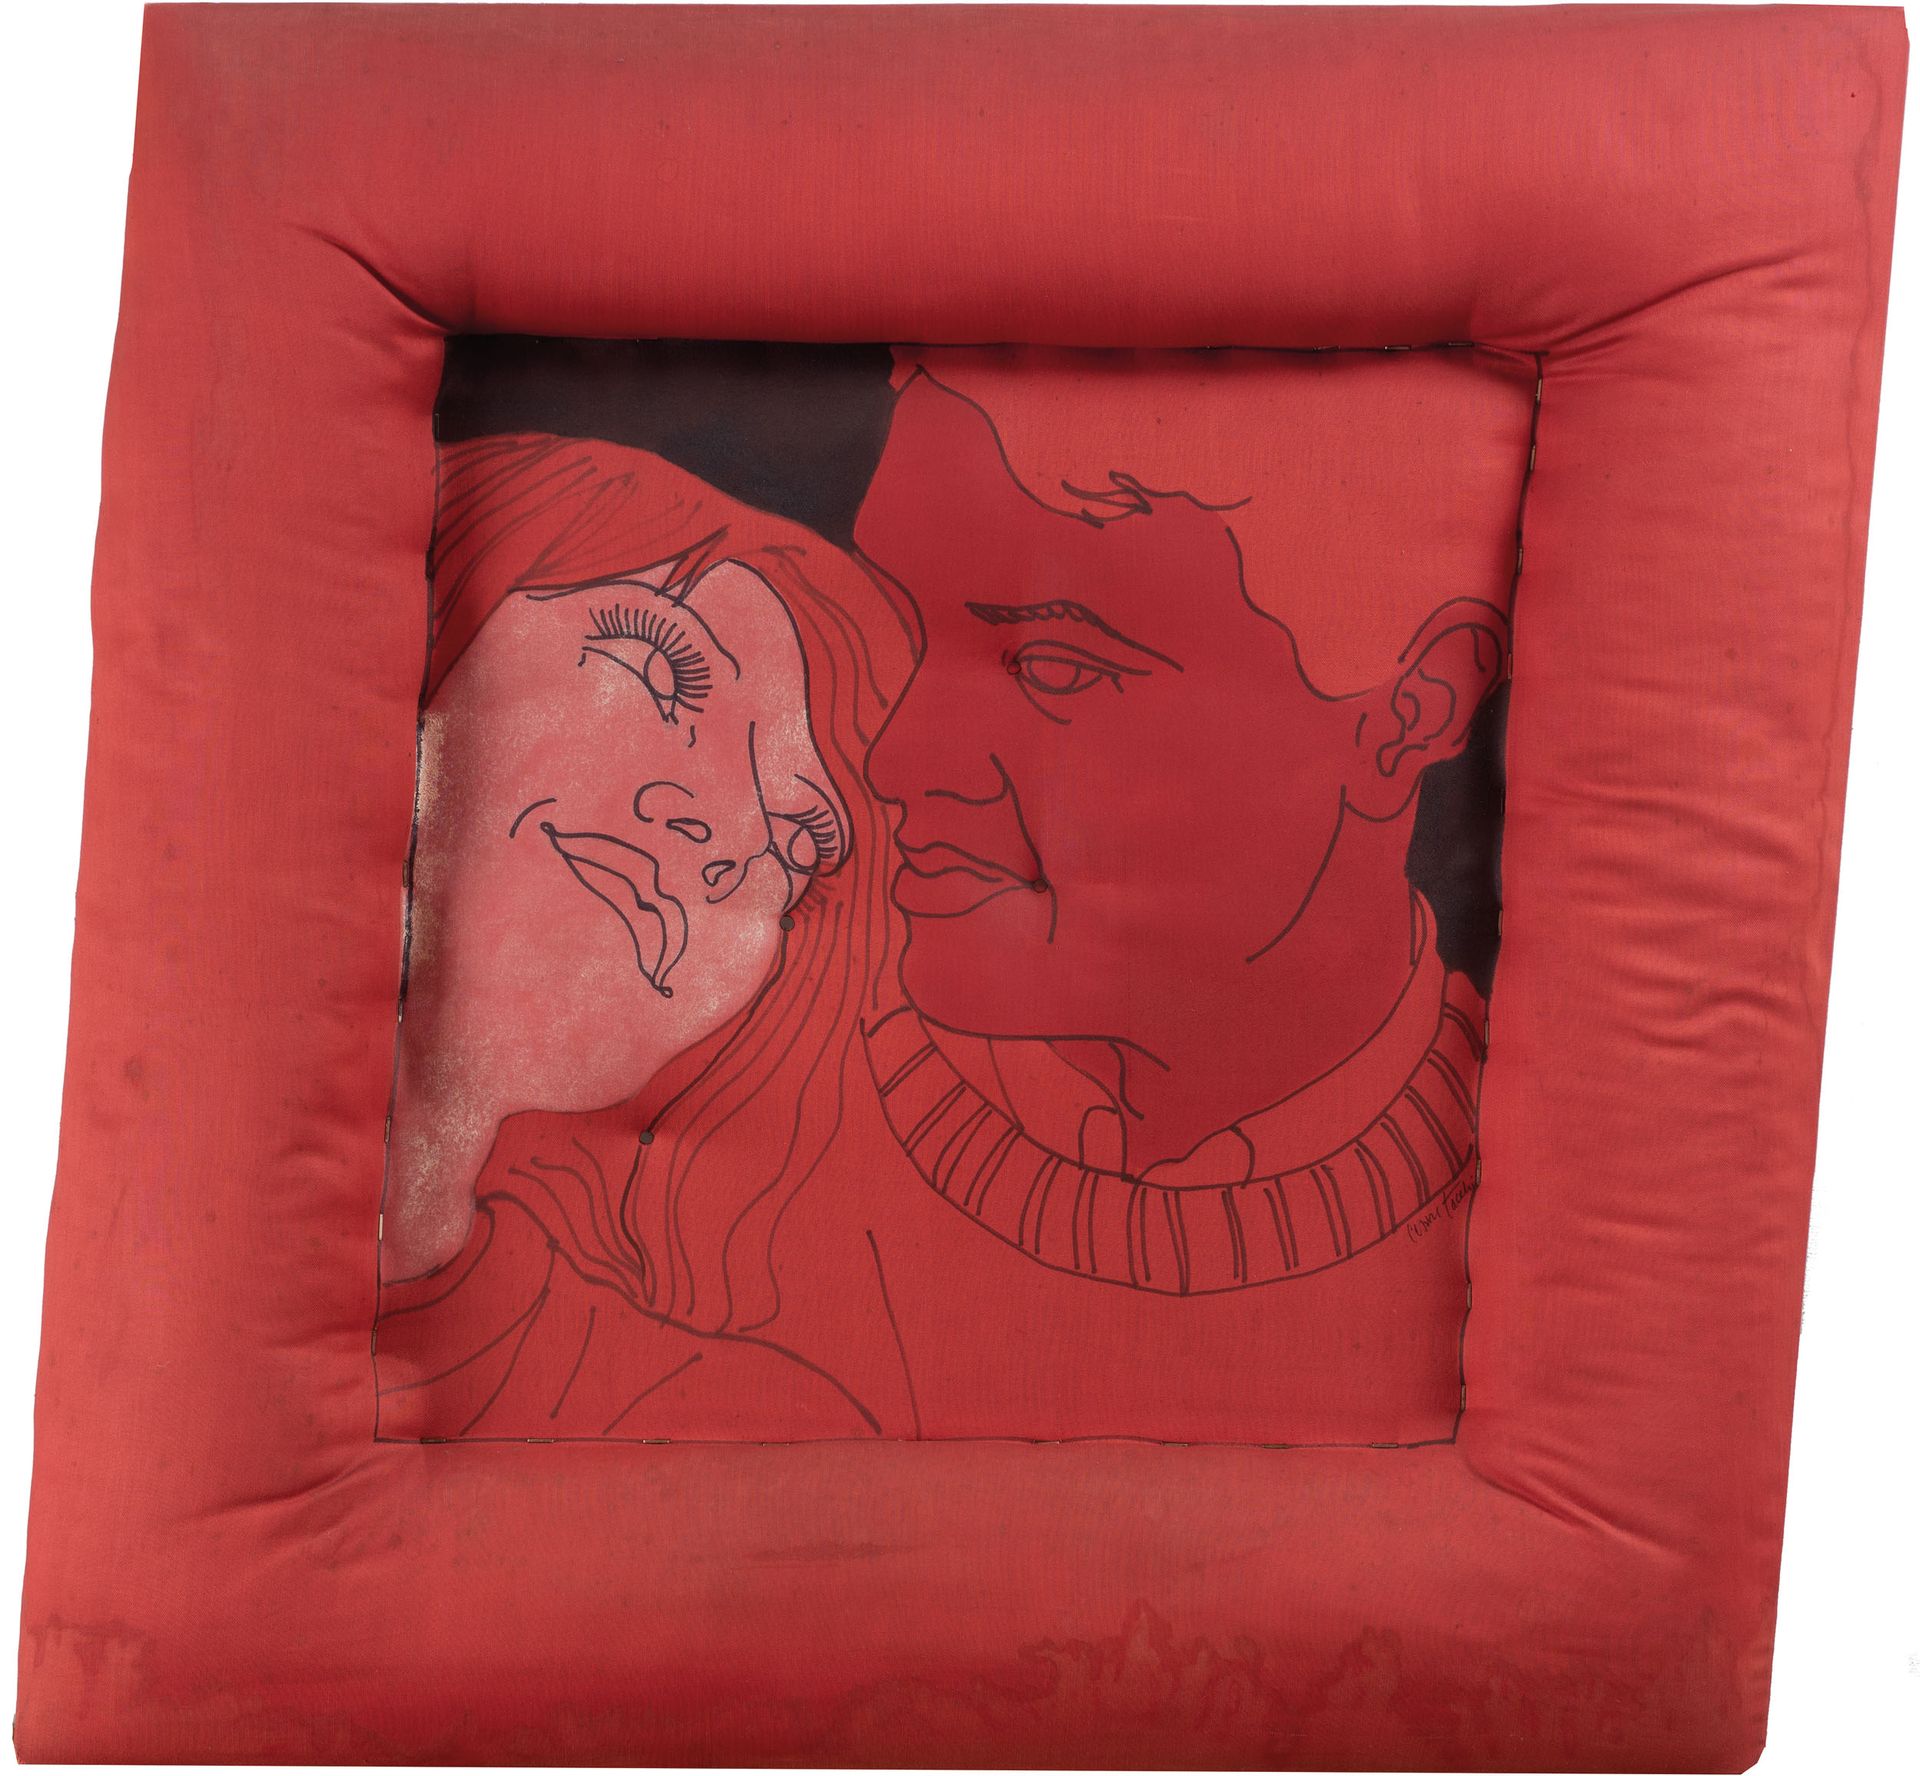 Cesare Tacchi Rome 1940 ; 2014
Happy Couple, 1967
Mixed media, ink and quilted f&hellip;